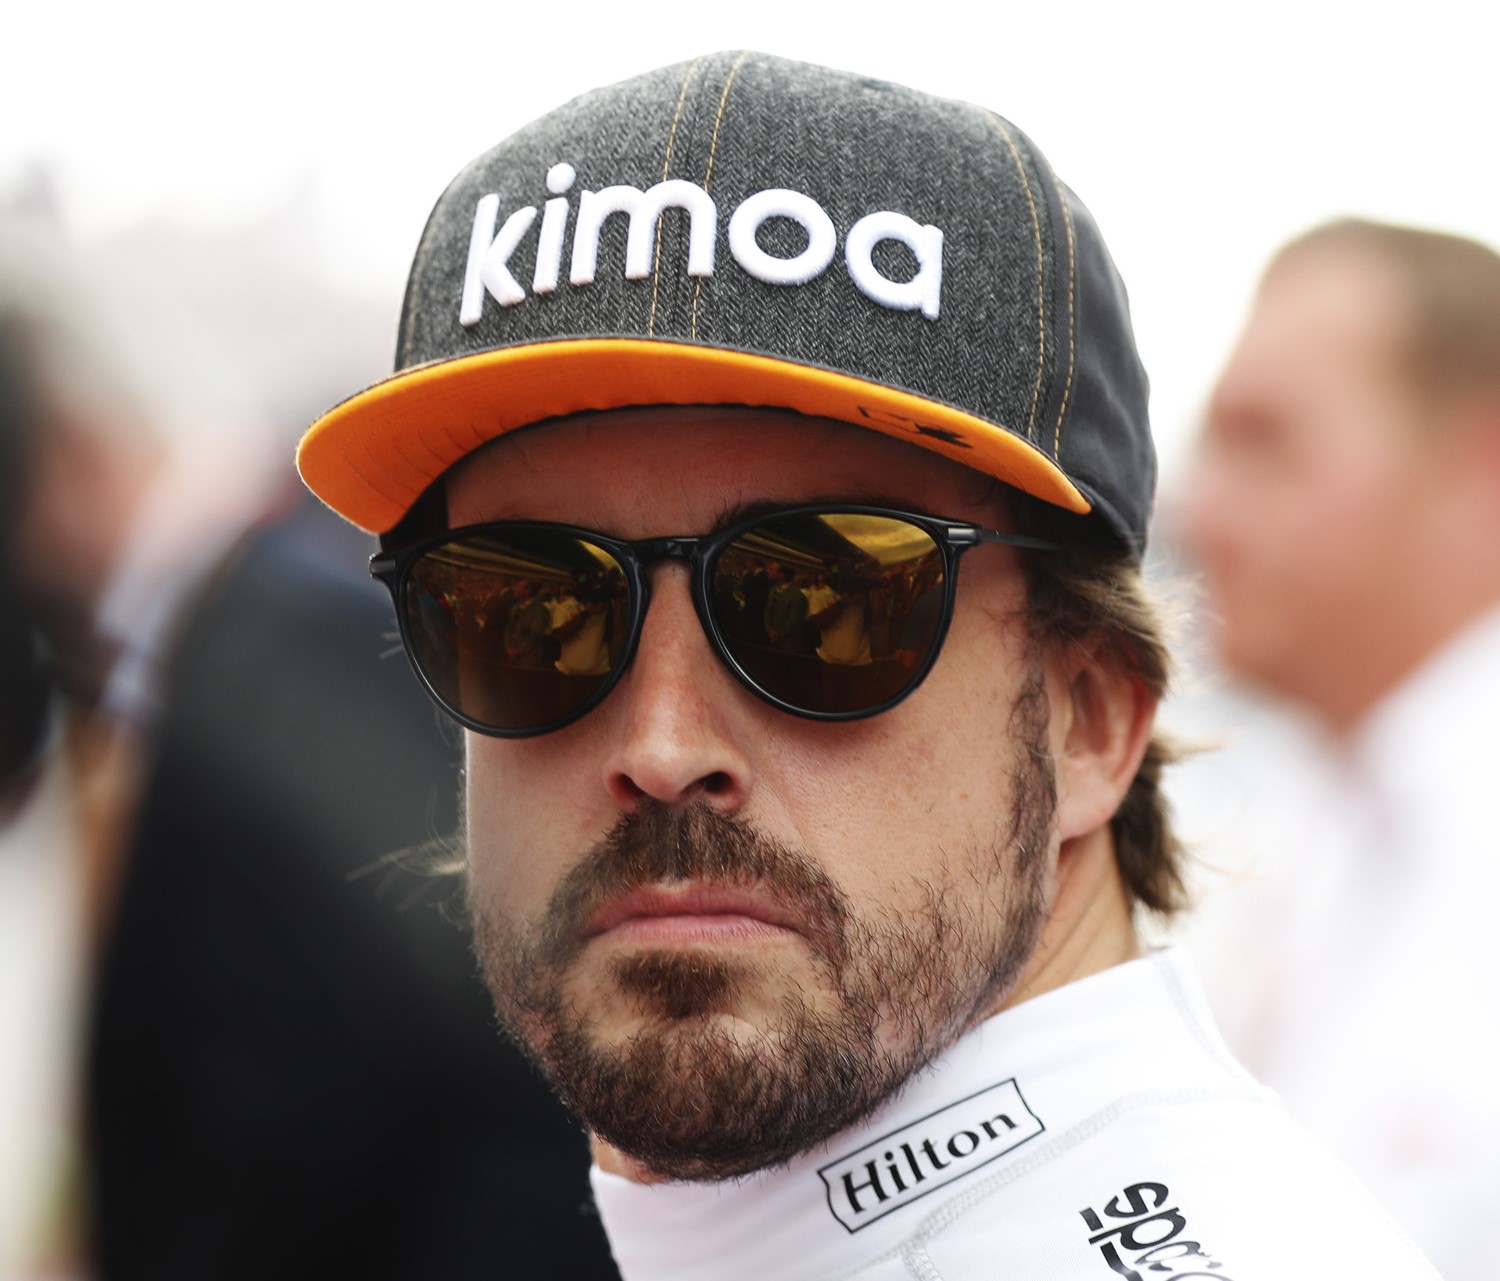 Alonso was his own worse enemy